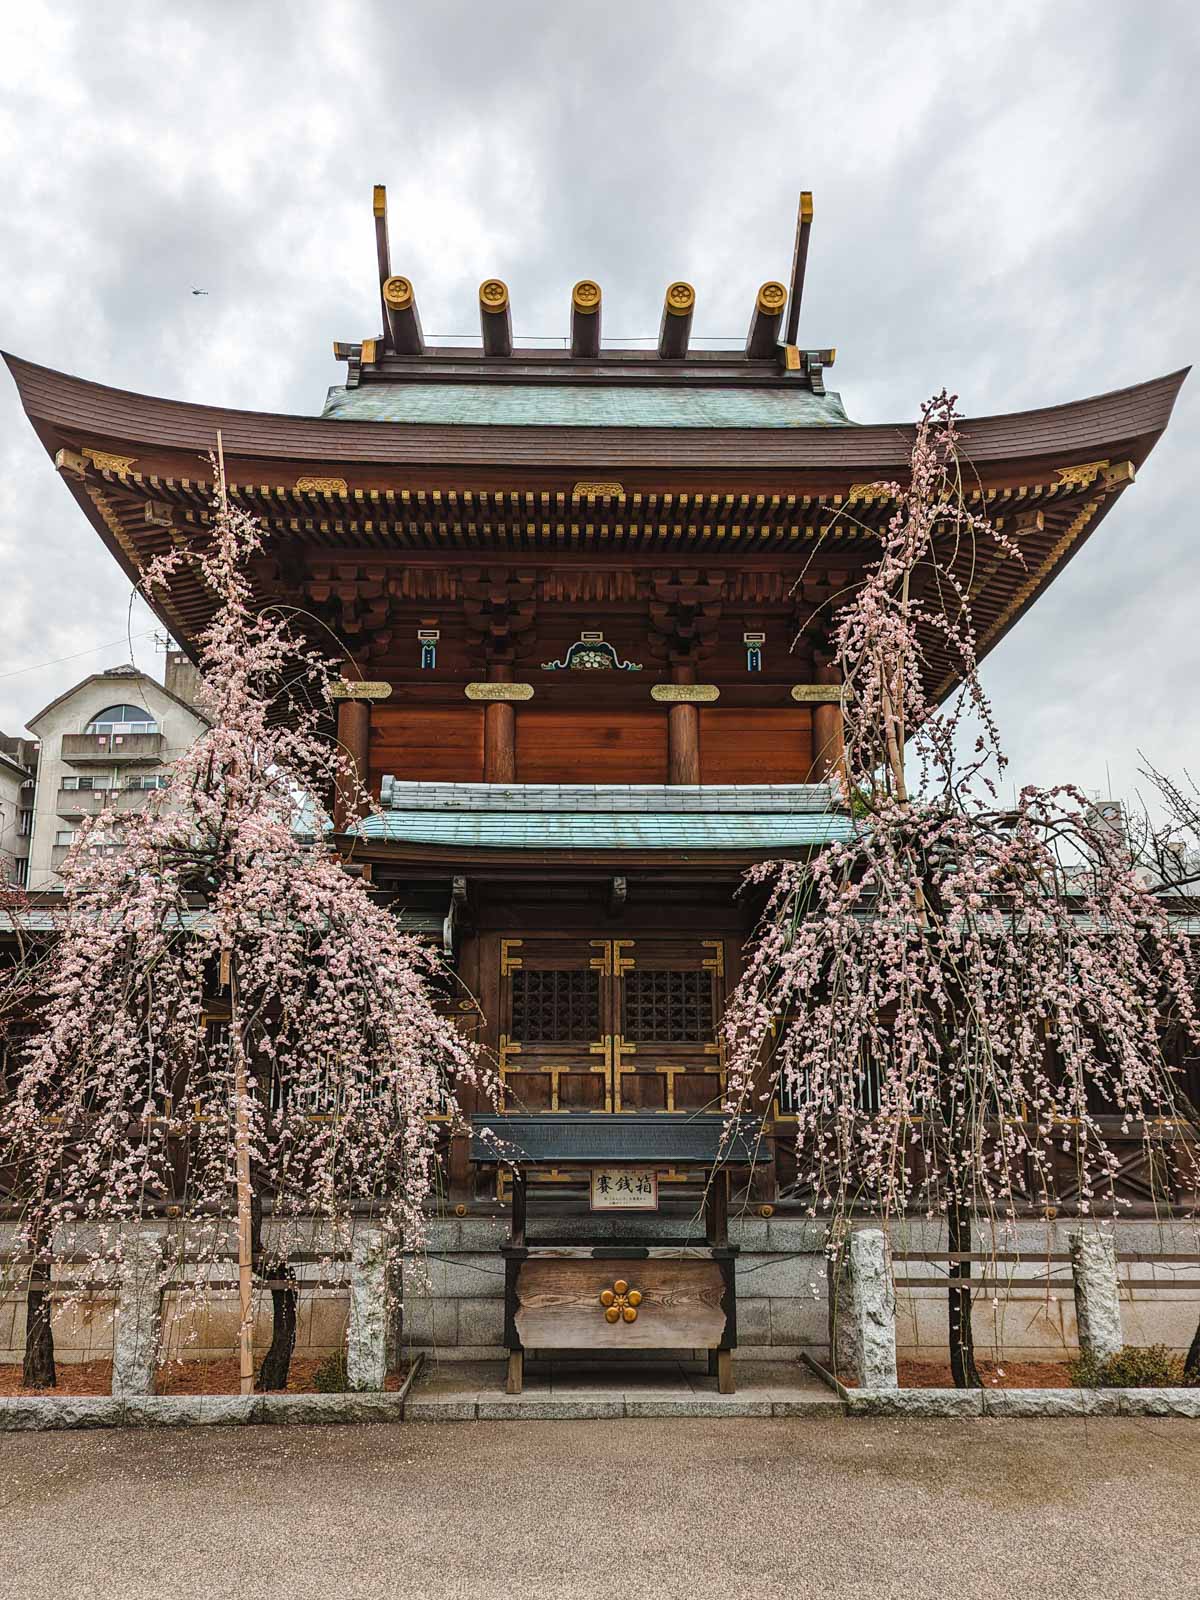 Tokyo Yushima Tenjin shrine with weeping plum blossom trees in front.